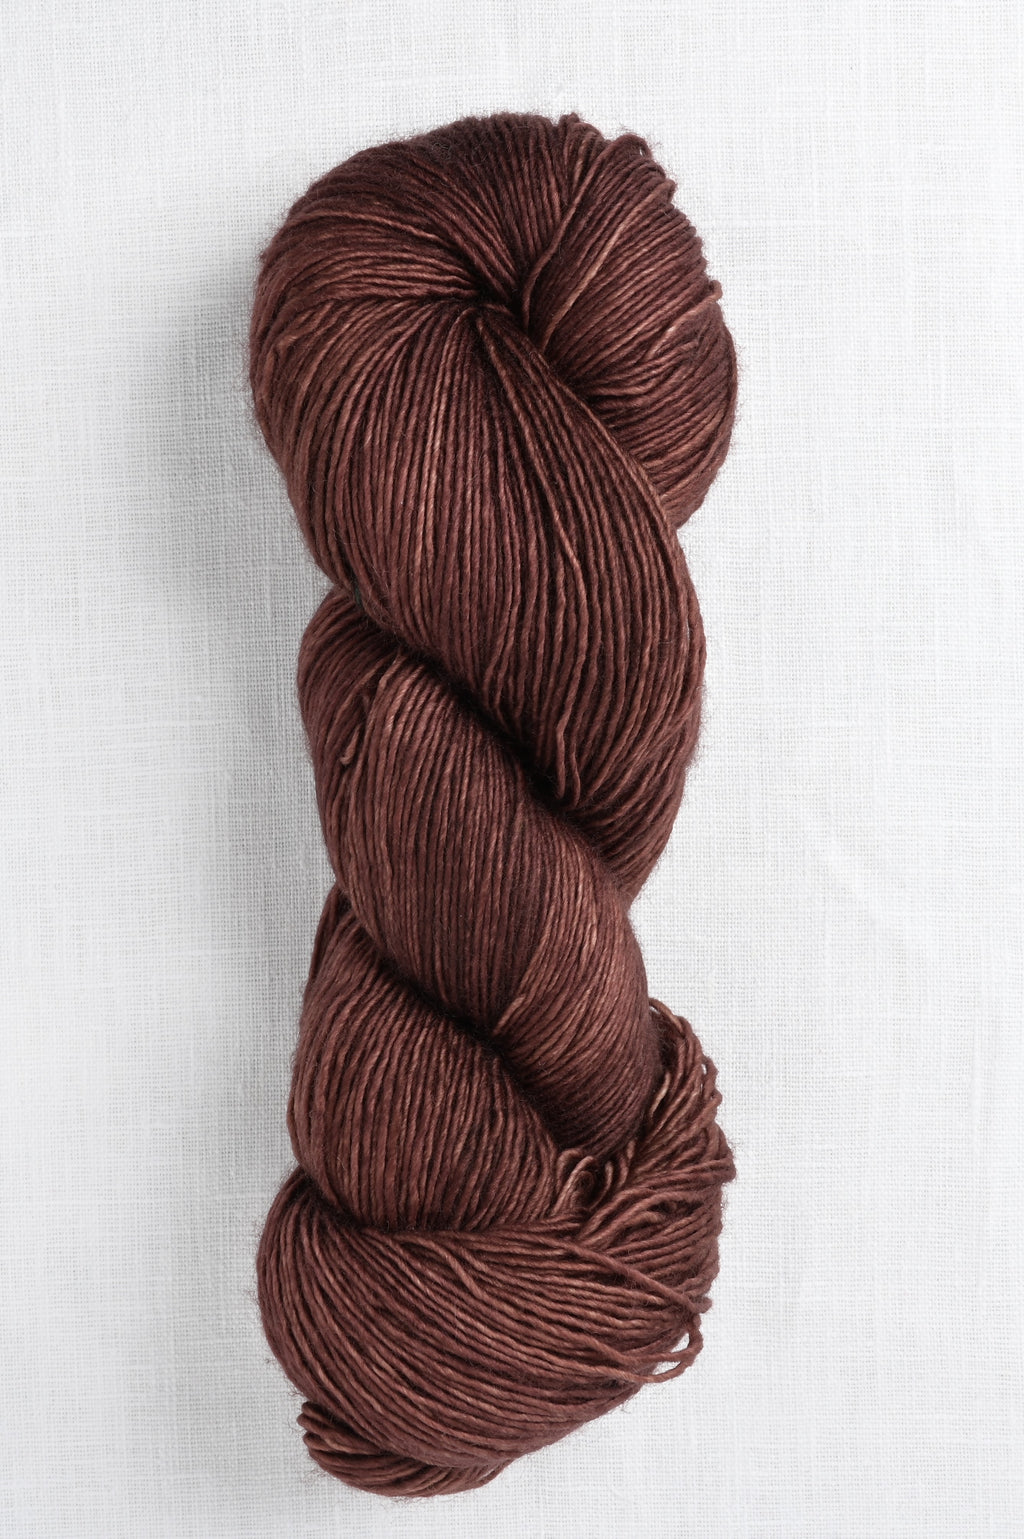 Madelinetosh Woolcycle Sport Sinfully Decadent (Core)